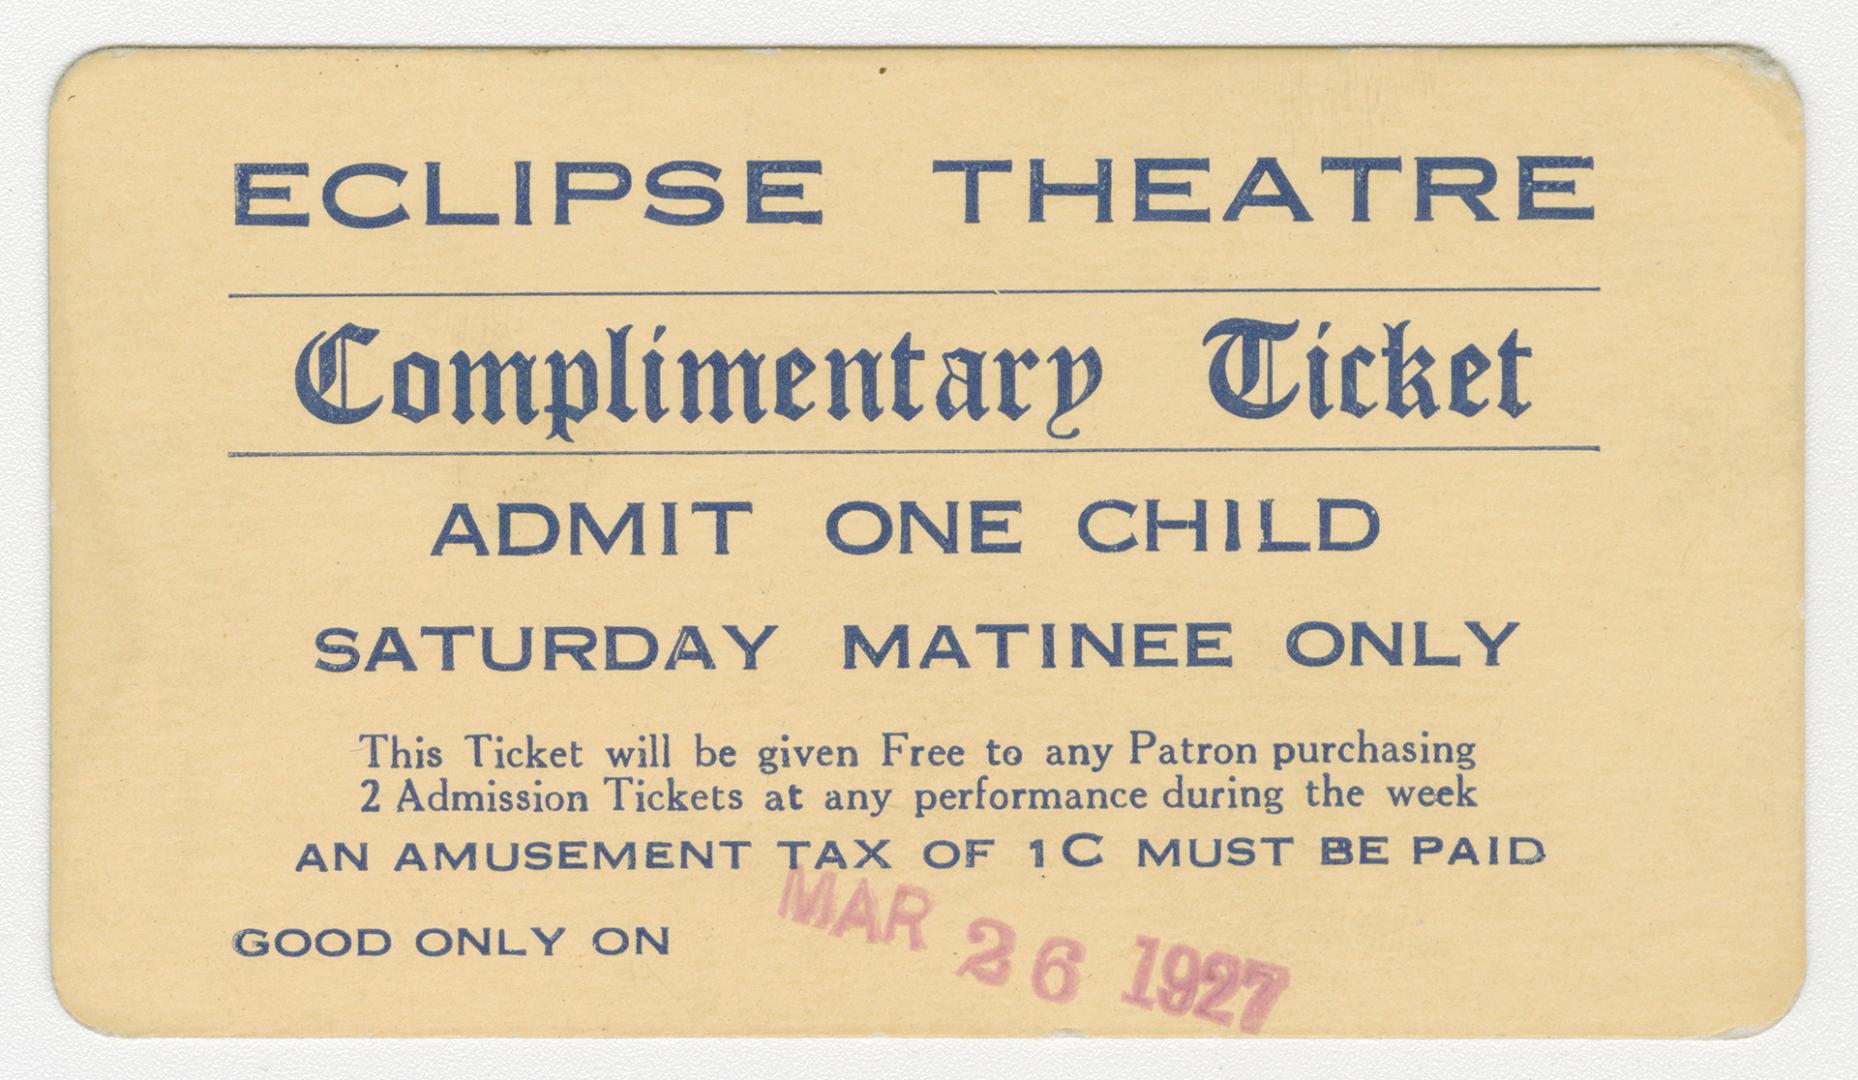 Eclipse Theatre complimentary ticket admit one child